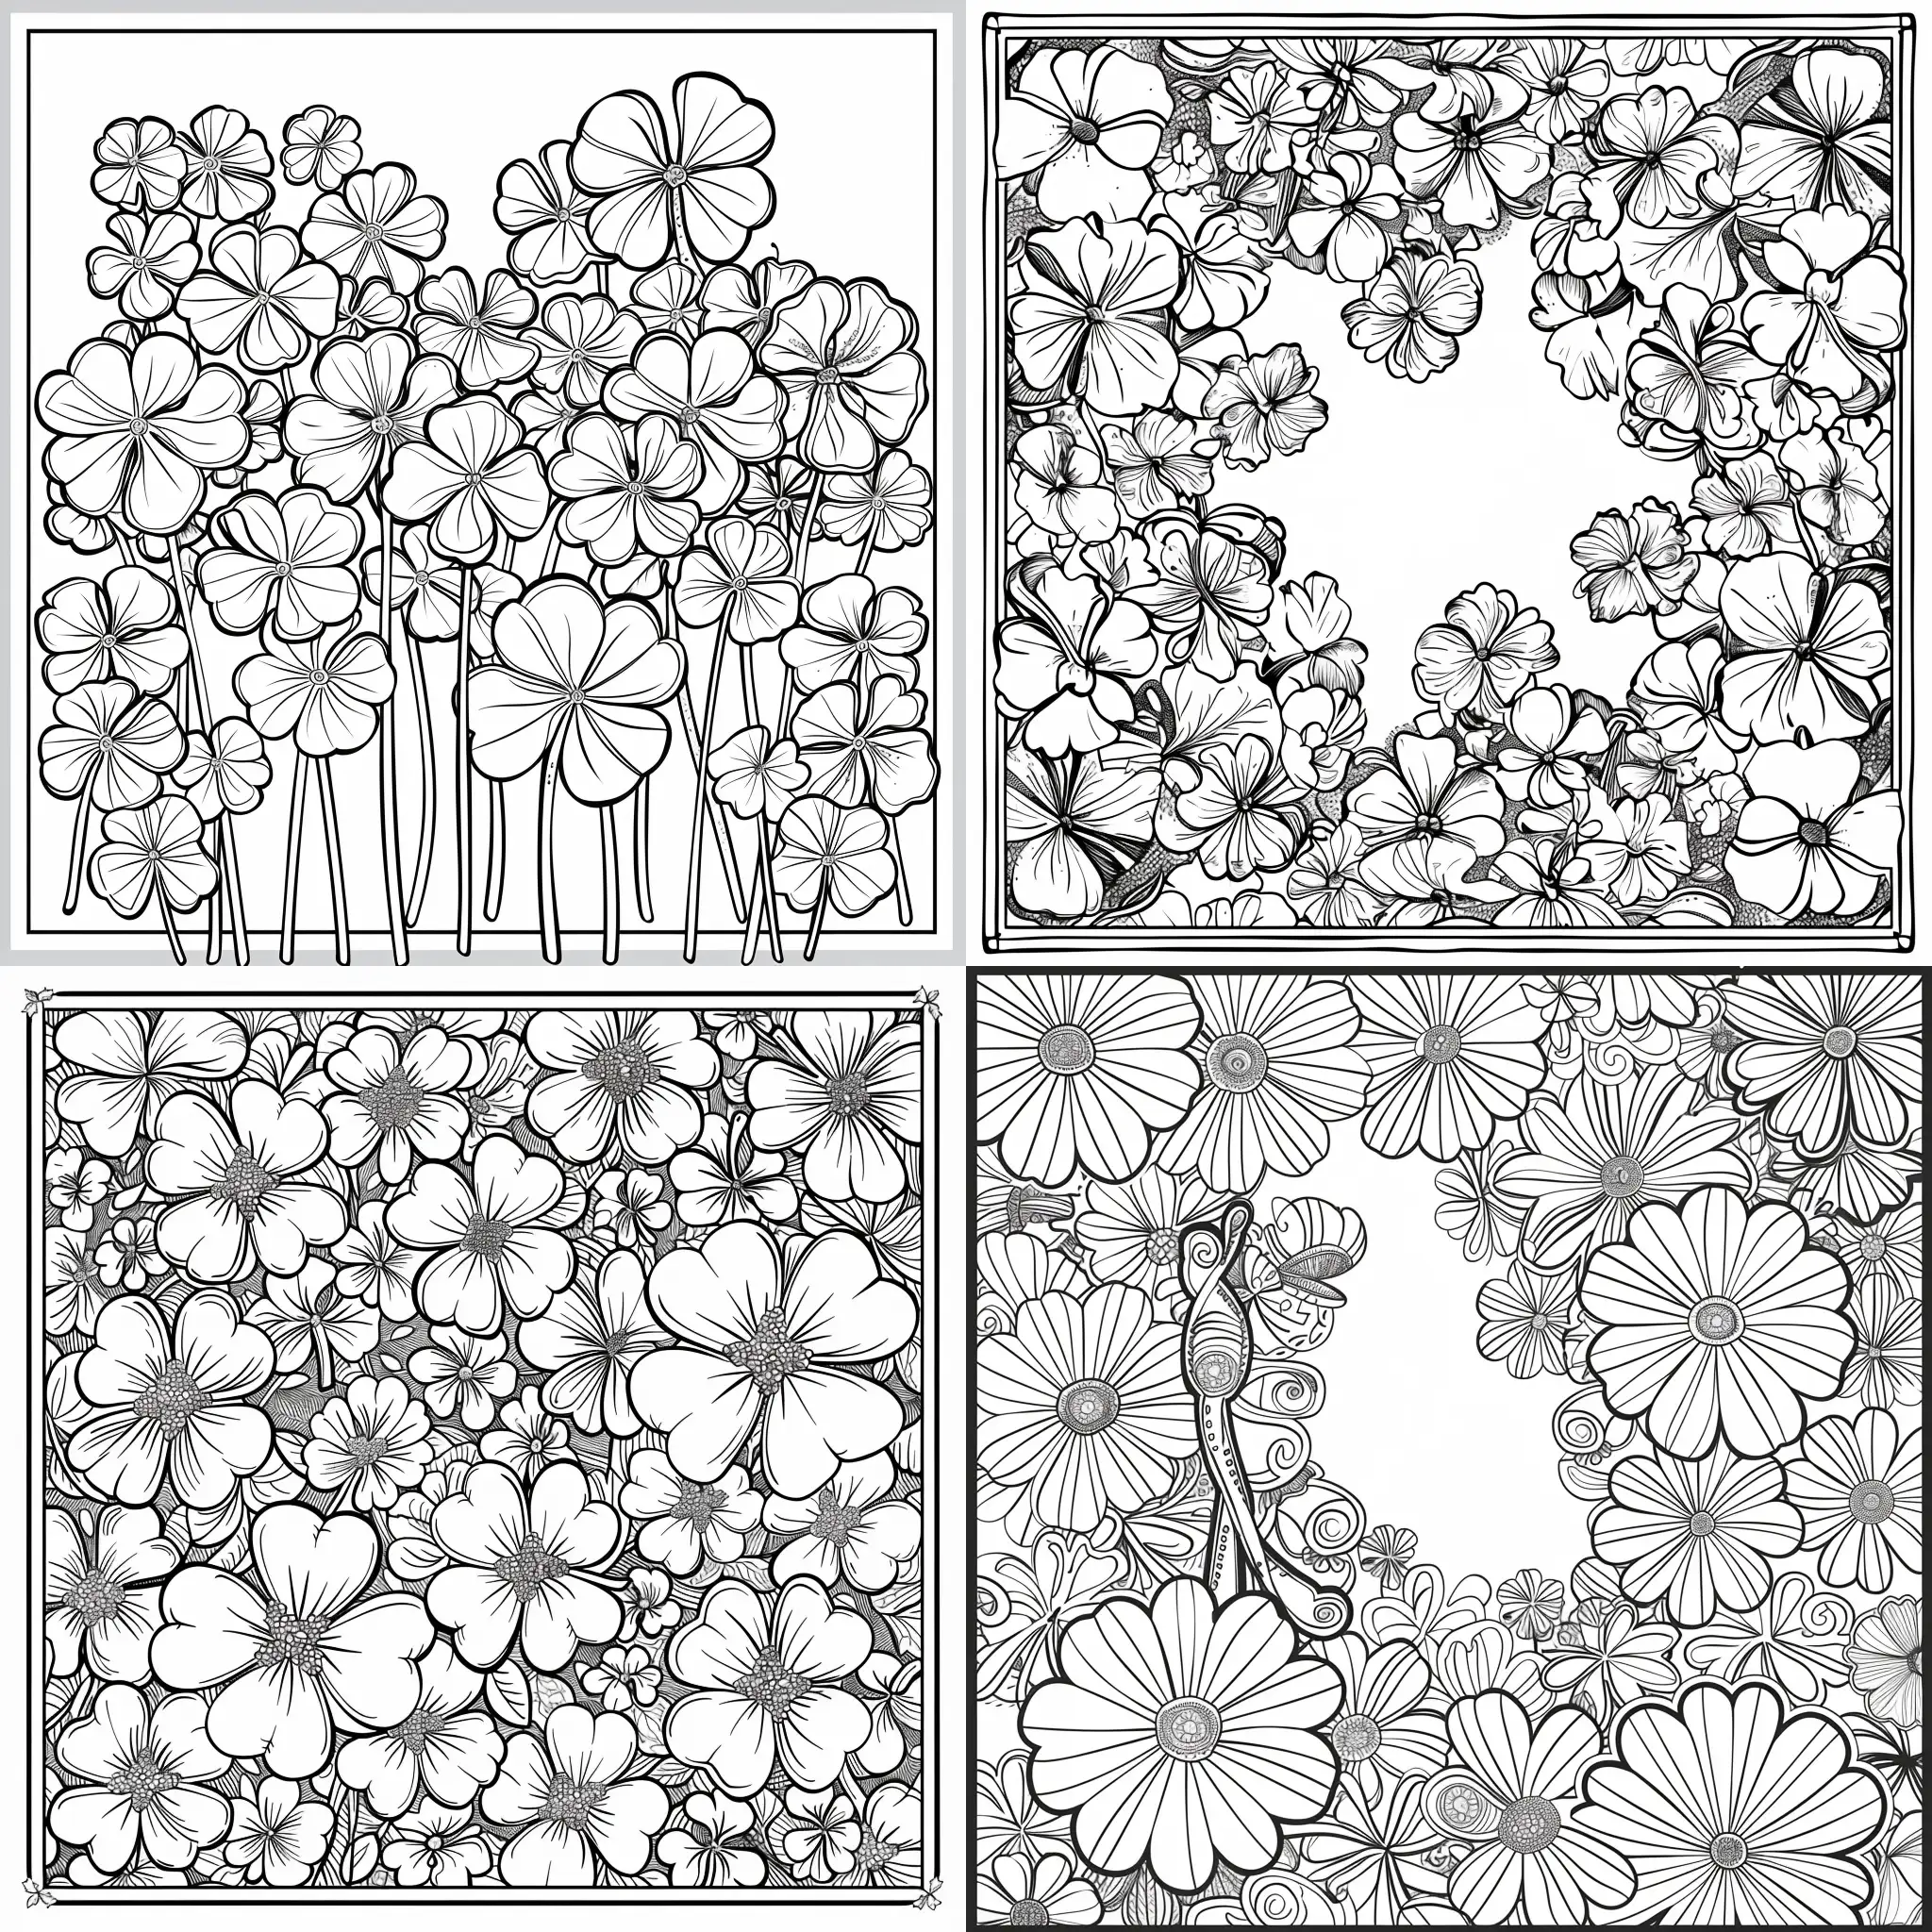 Coloring book page, A:23, no background, St Patrick's Day theme, no frames, fine art